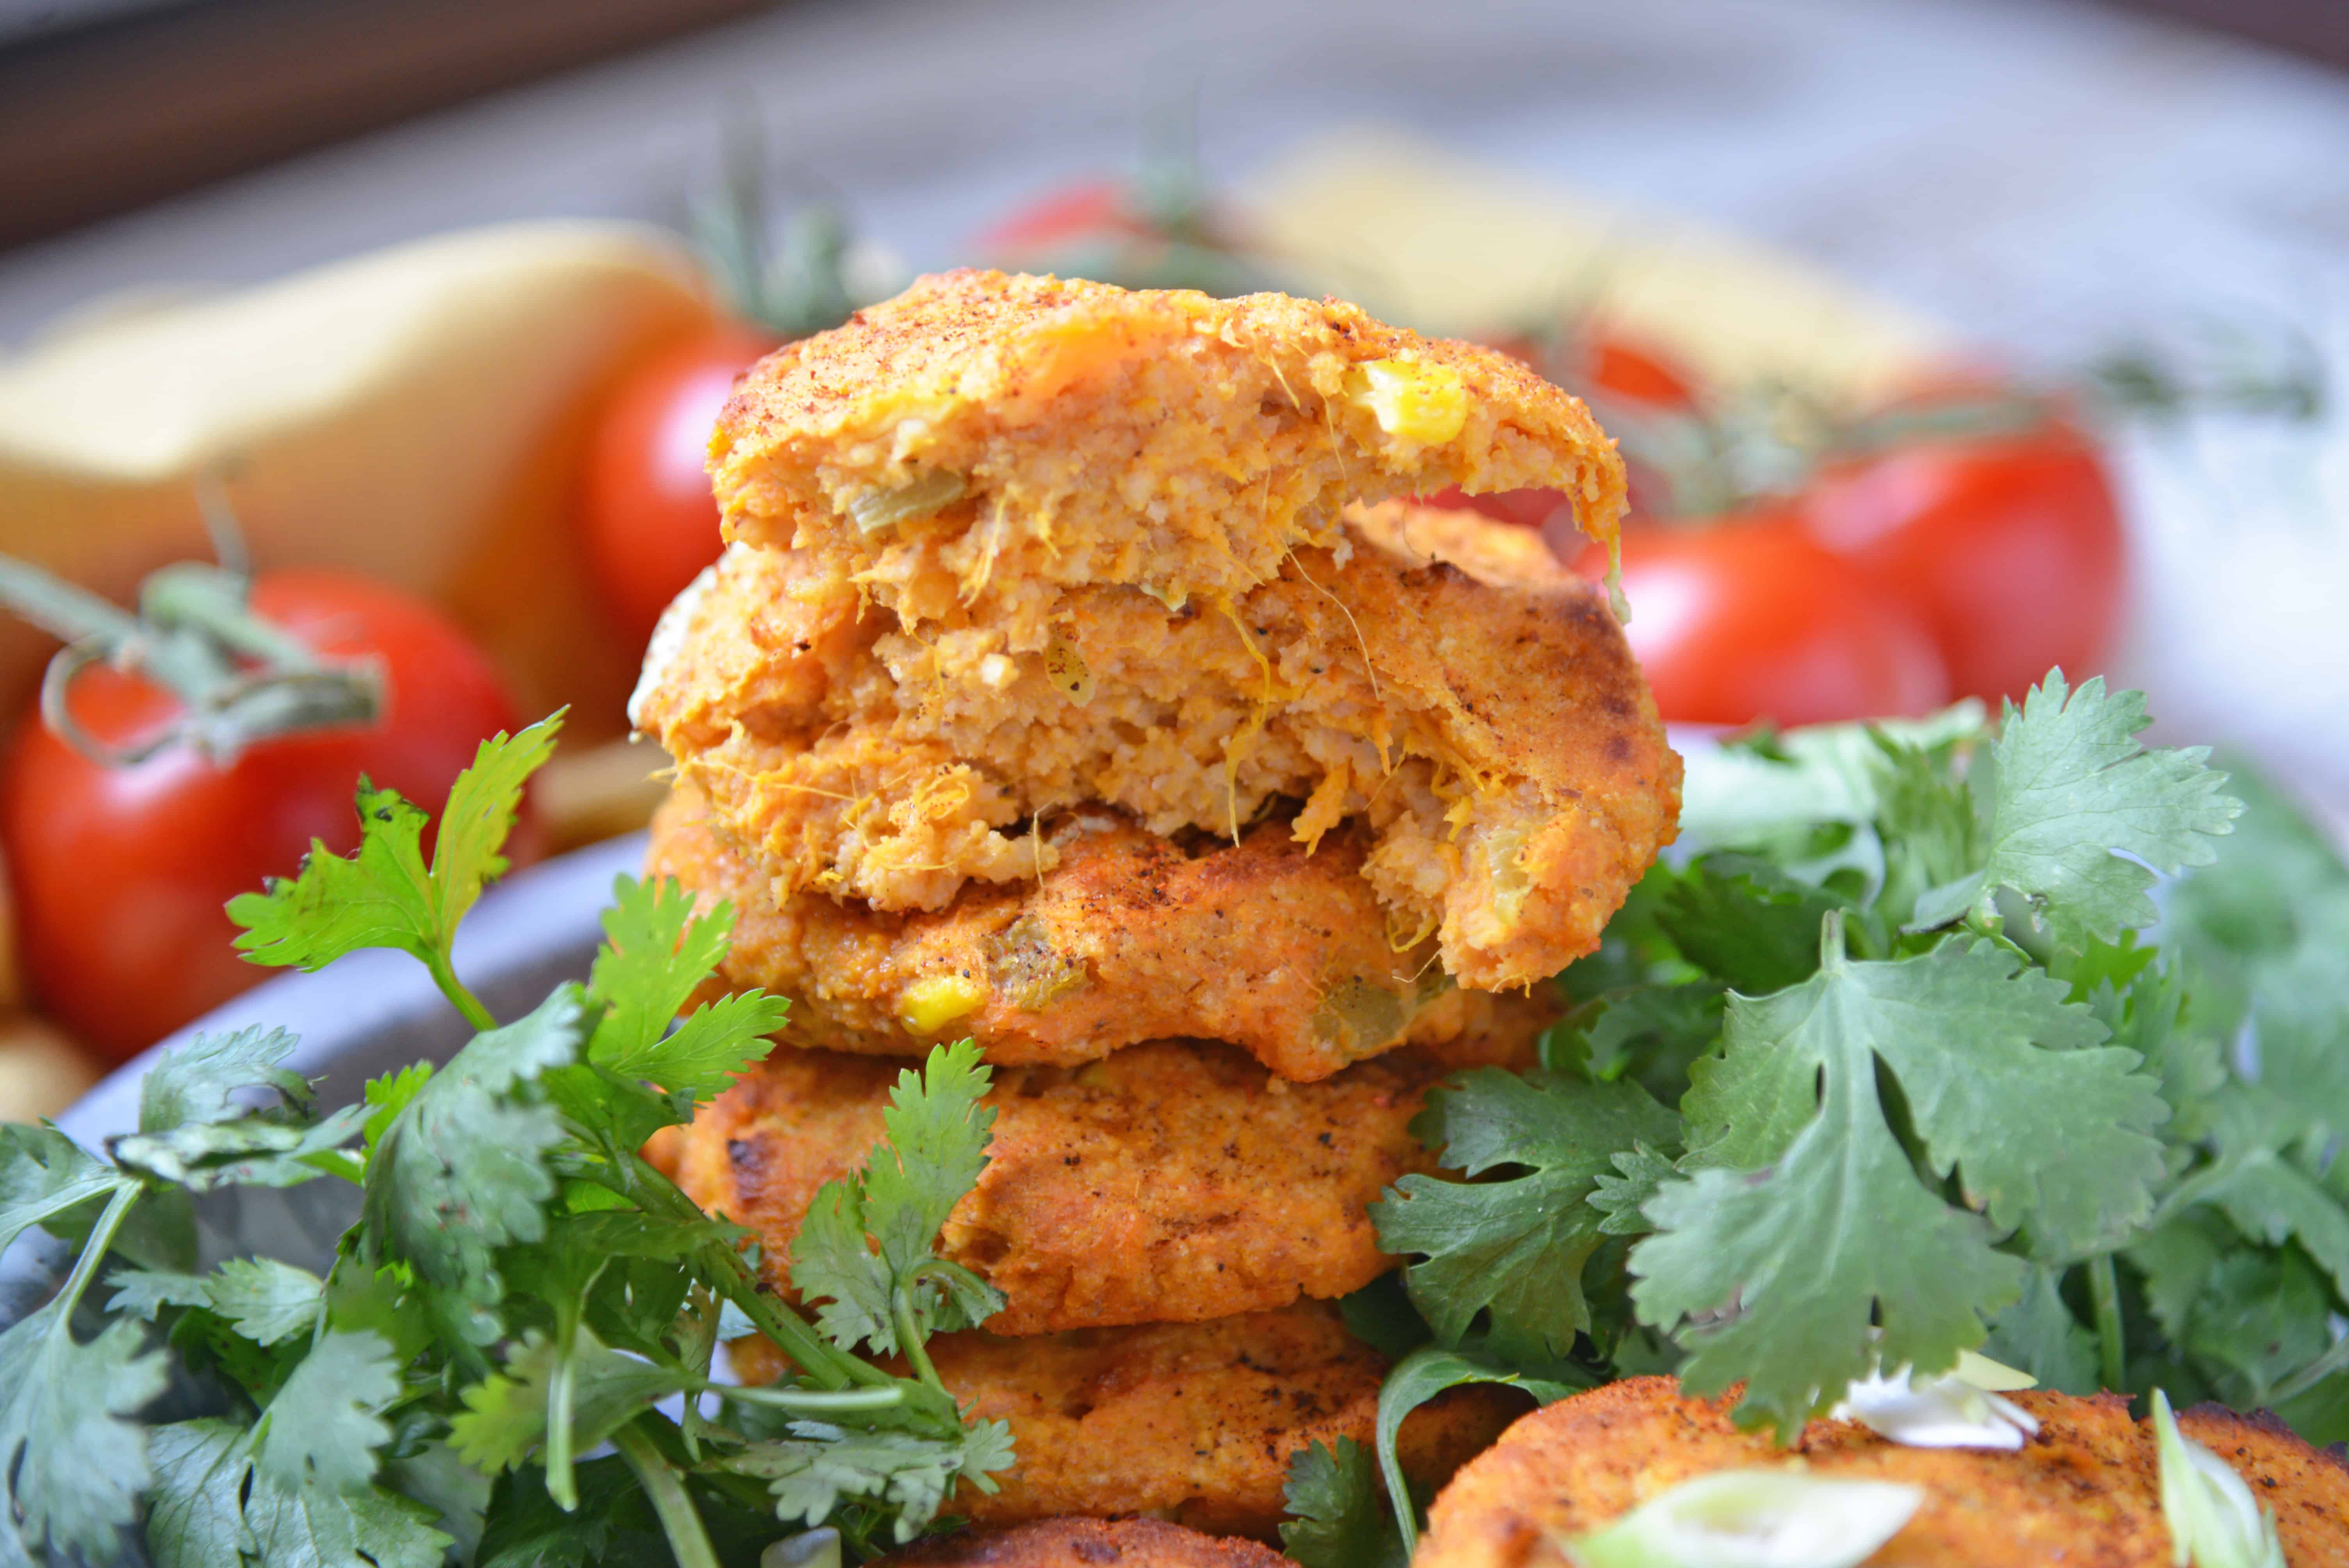 Southwestern Sweet Potato Pancakes are made with mashed sweet potatoes, green chile, corn and southwest spices making then sweet and smoky. Served with a cool, avocado dipping sauce. #potatopancakes #sweetpotatorecipe www.savoryexperiments.com